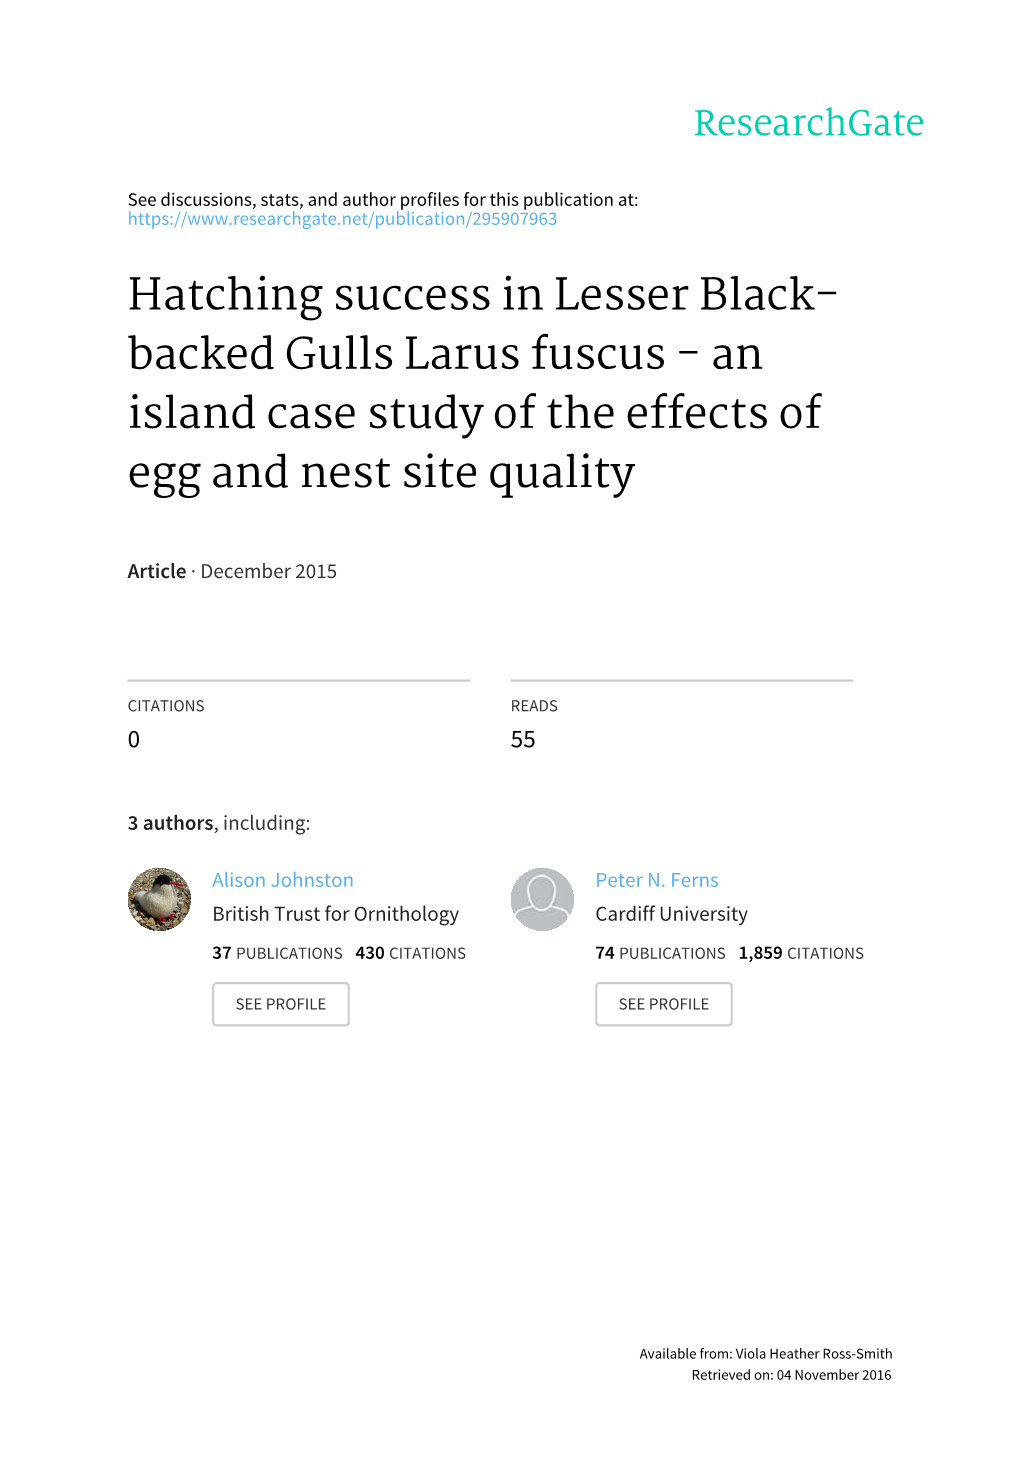 Hatching Success in Lesser Black- Backed Gulls Larus Fuscus - an Island Case Study of the Effects of Egg and Nest Site Quality